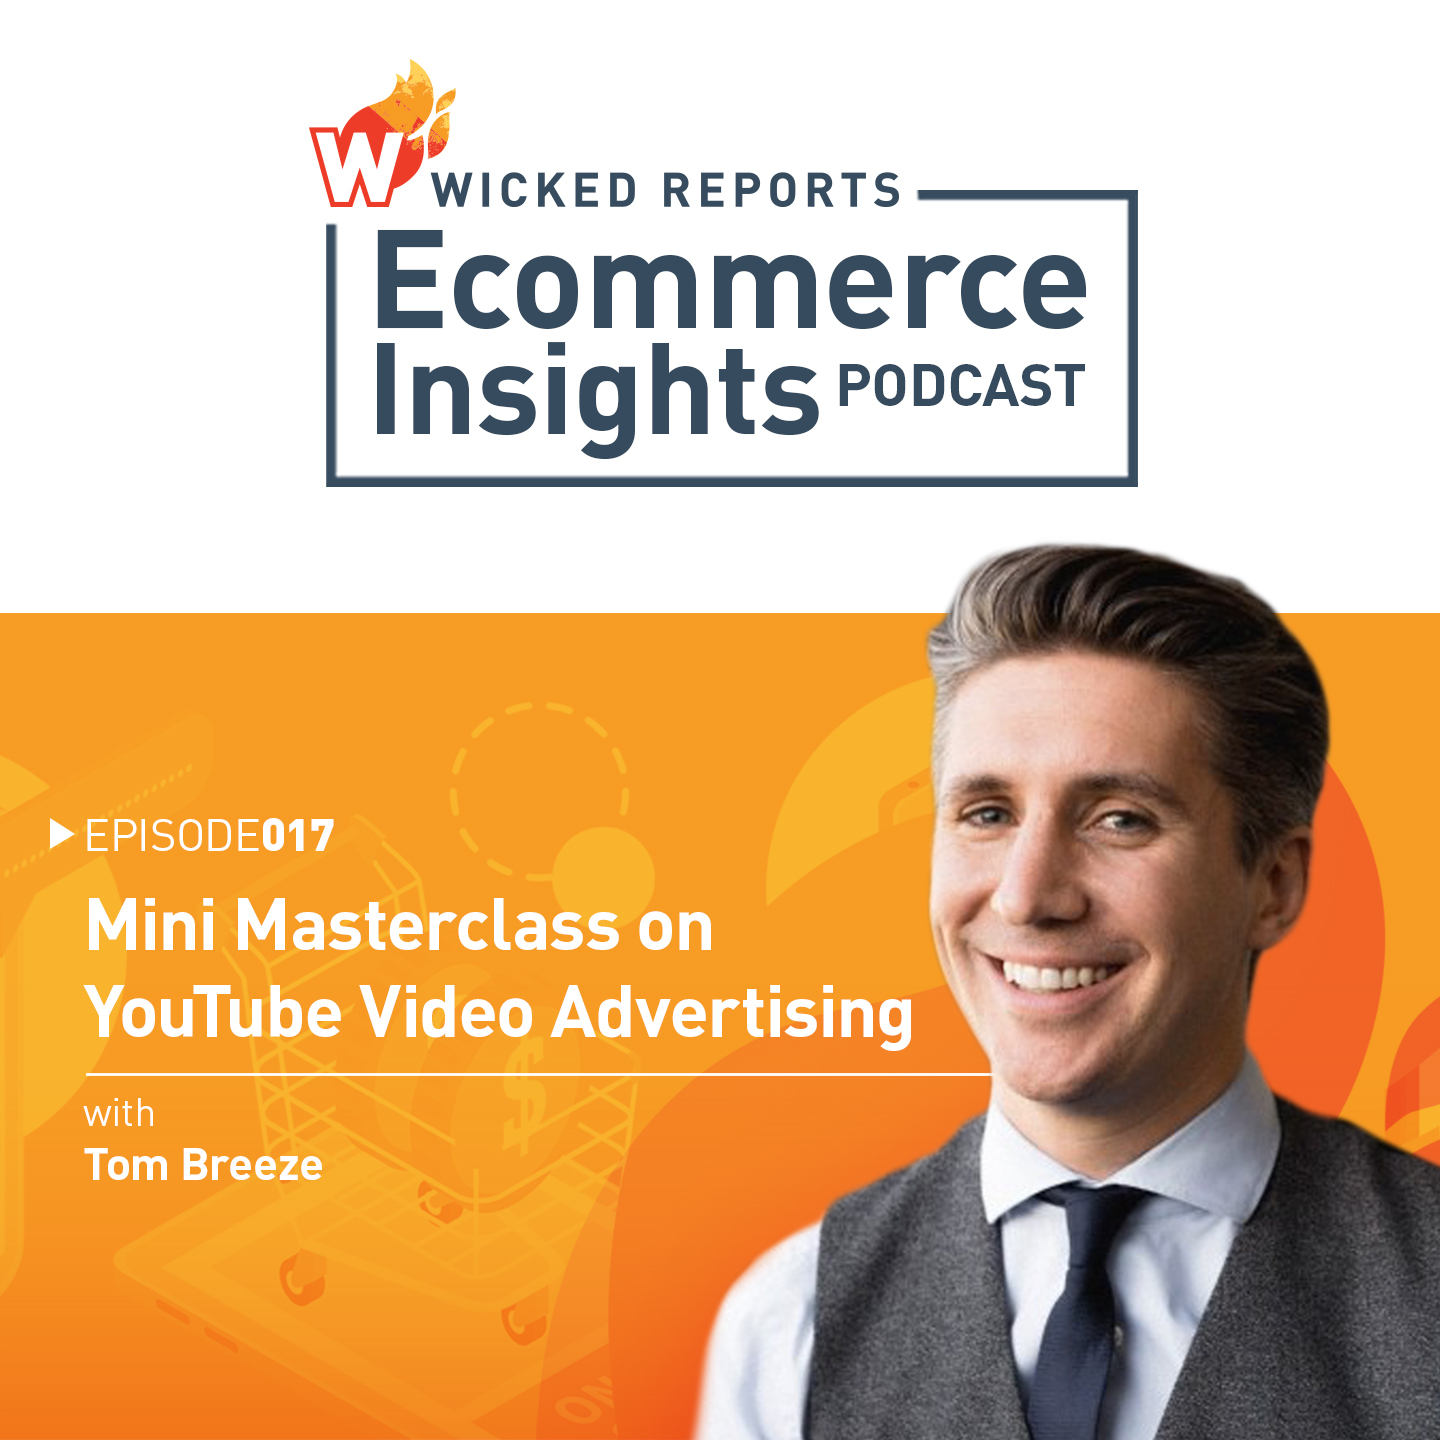 Mini Masterclass on YouTube Video Advertising with Tom Breeze